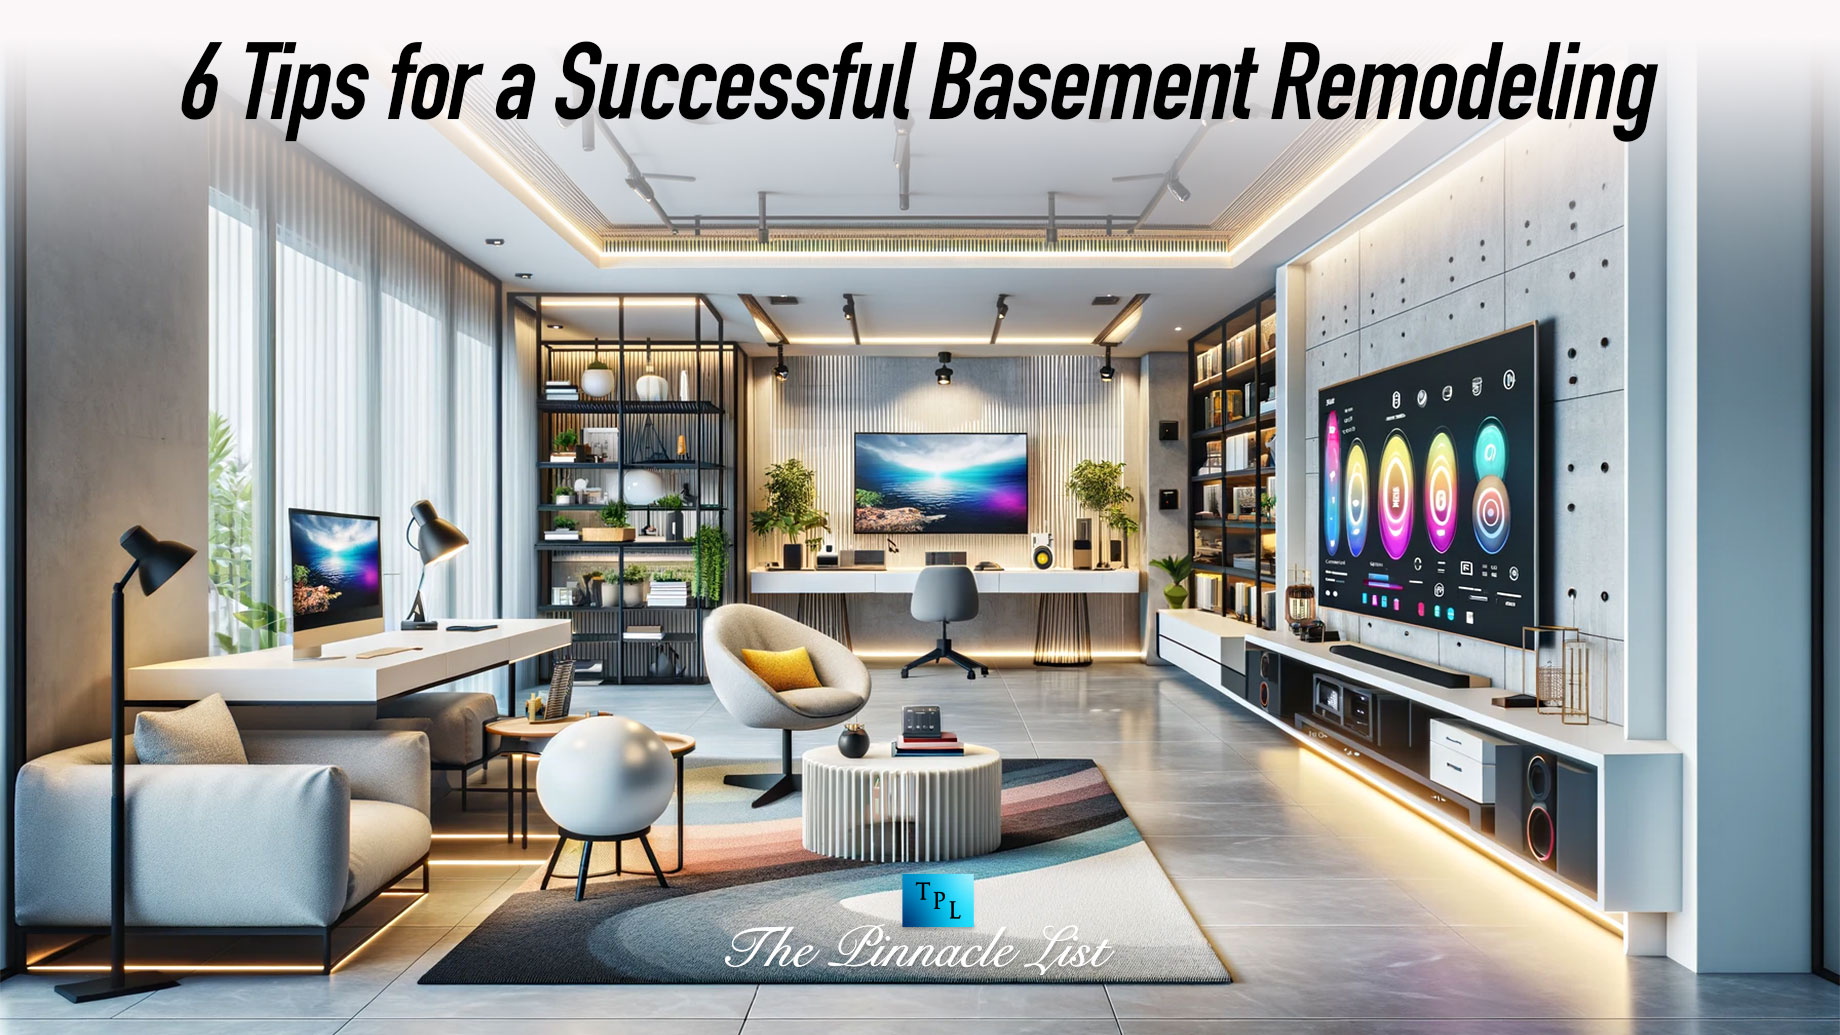 6 Tips for a Successful Basement Remodeling